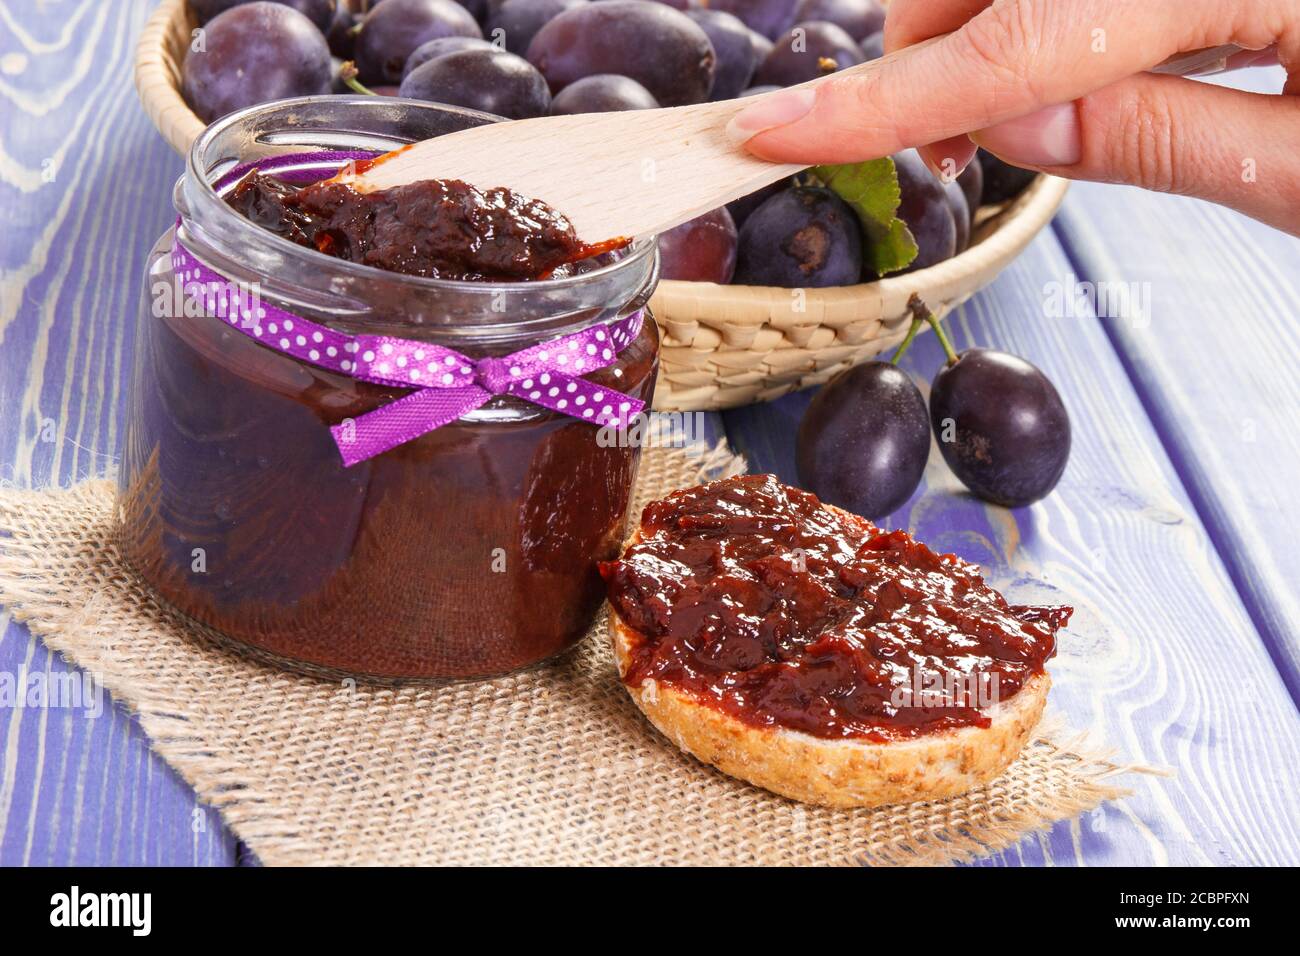 Hand of woman with wooden knife preparing sandwiches with plum marmalade or jam, concept of healthy sweet snack or dessert Stock Photo